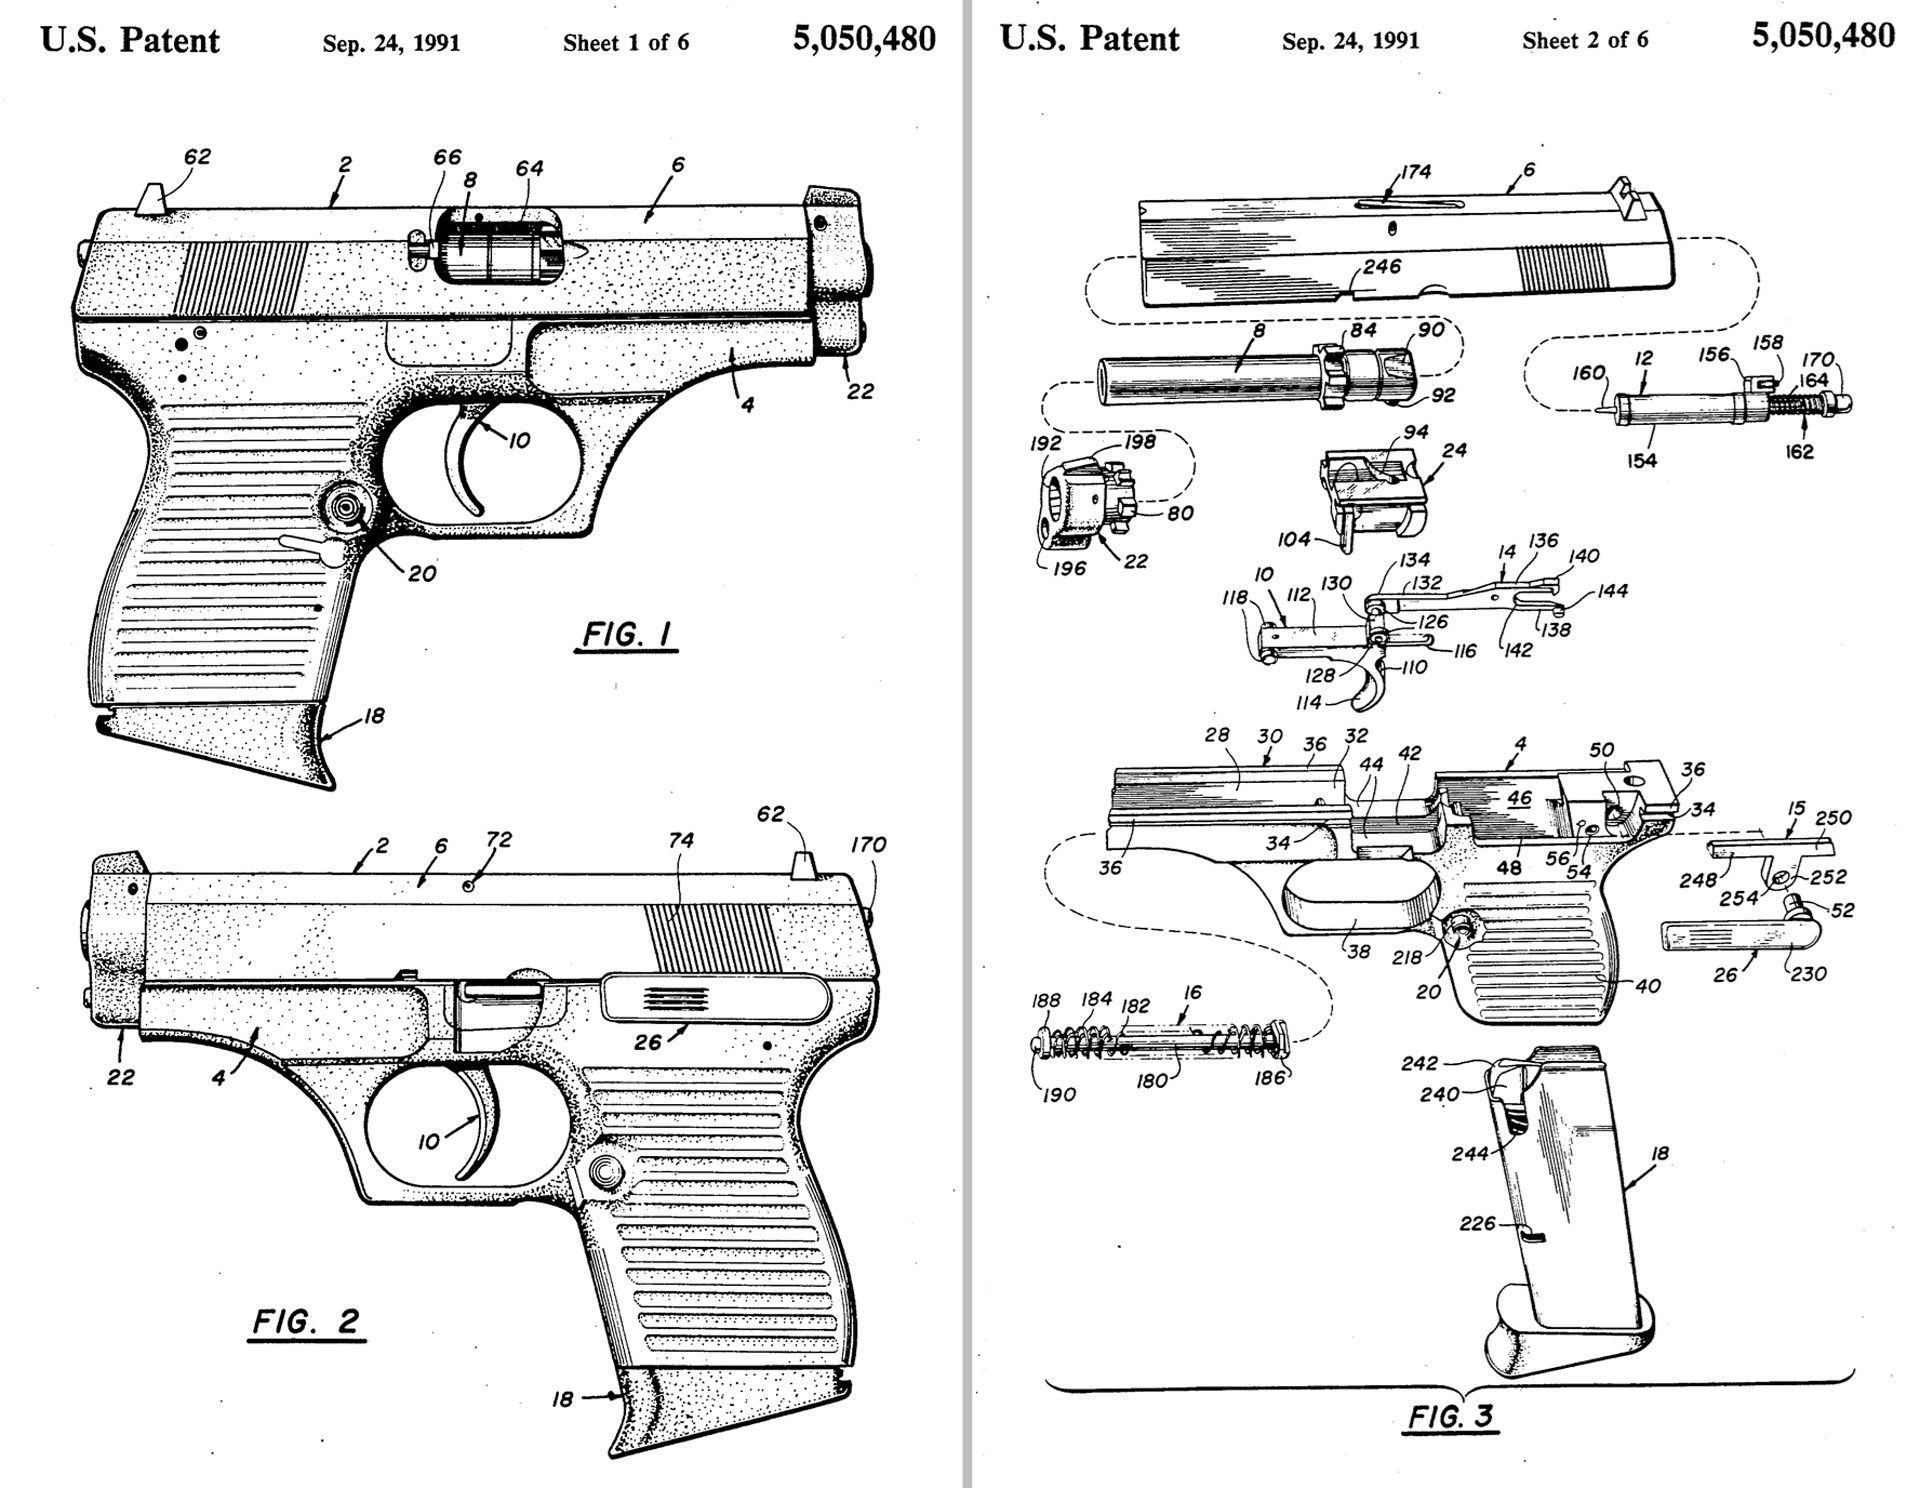 Stoner Patent. Images from Knight and Stoner patent for the pistol that would become the Colt 2000 All American.